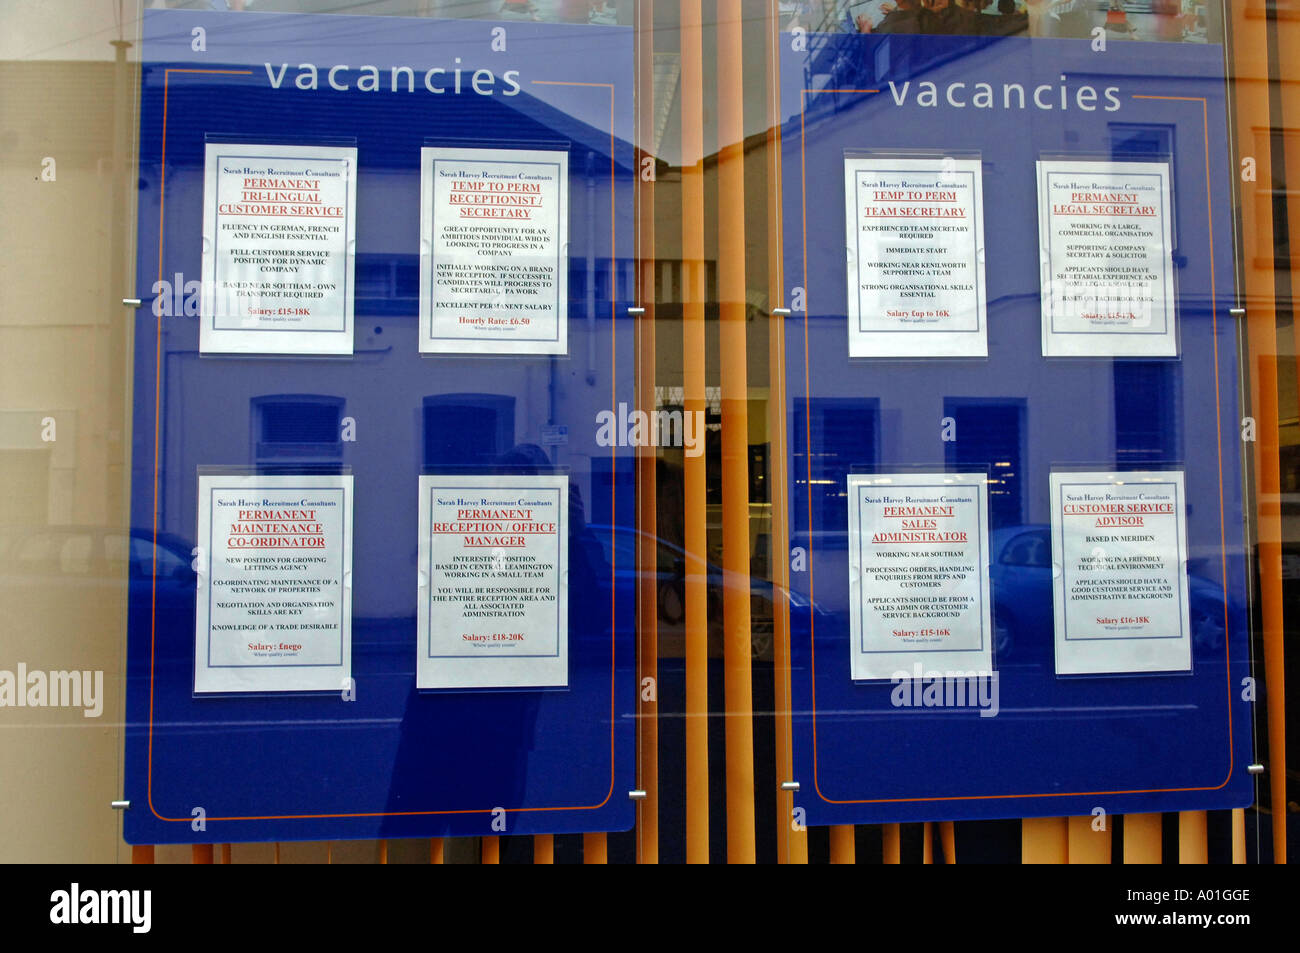 Job adverts placed in the window of a recruitment agency, England, UK Stock Photo